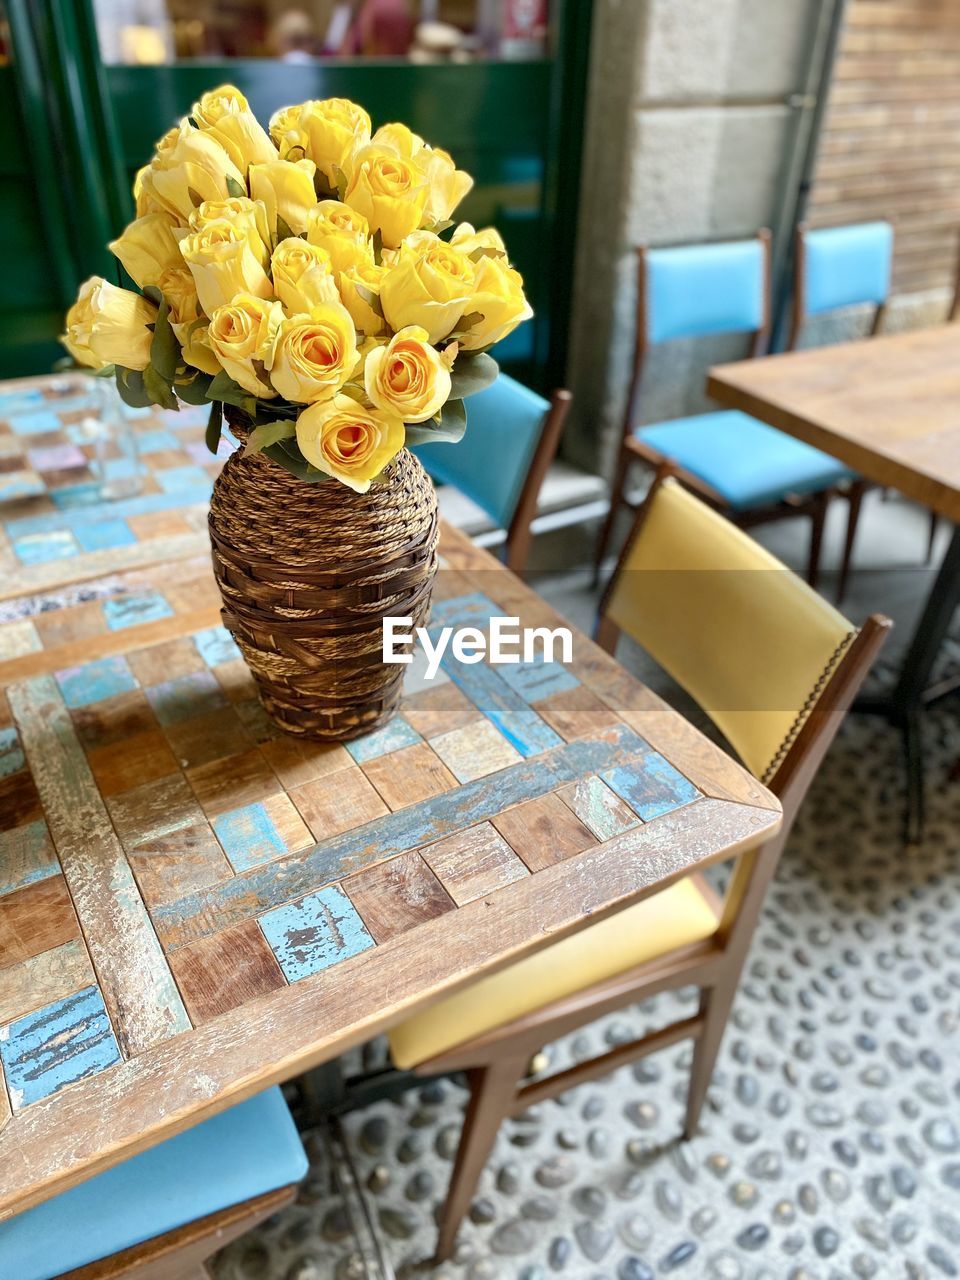 flower, flowering plant, table, yellow, seat, chair, plant, freshness, furniture, arrangement, no people, beauty in nature, nature, business, vase, indoors, flower arrangement, wood, food and drink, focus on foreground, bouquet, decoration, cafe, coffee table, container